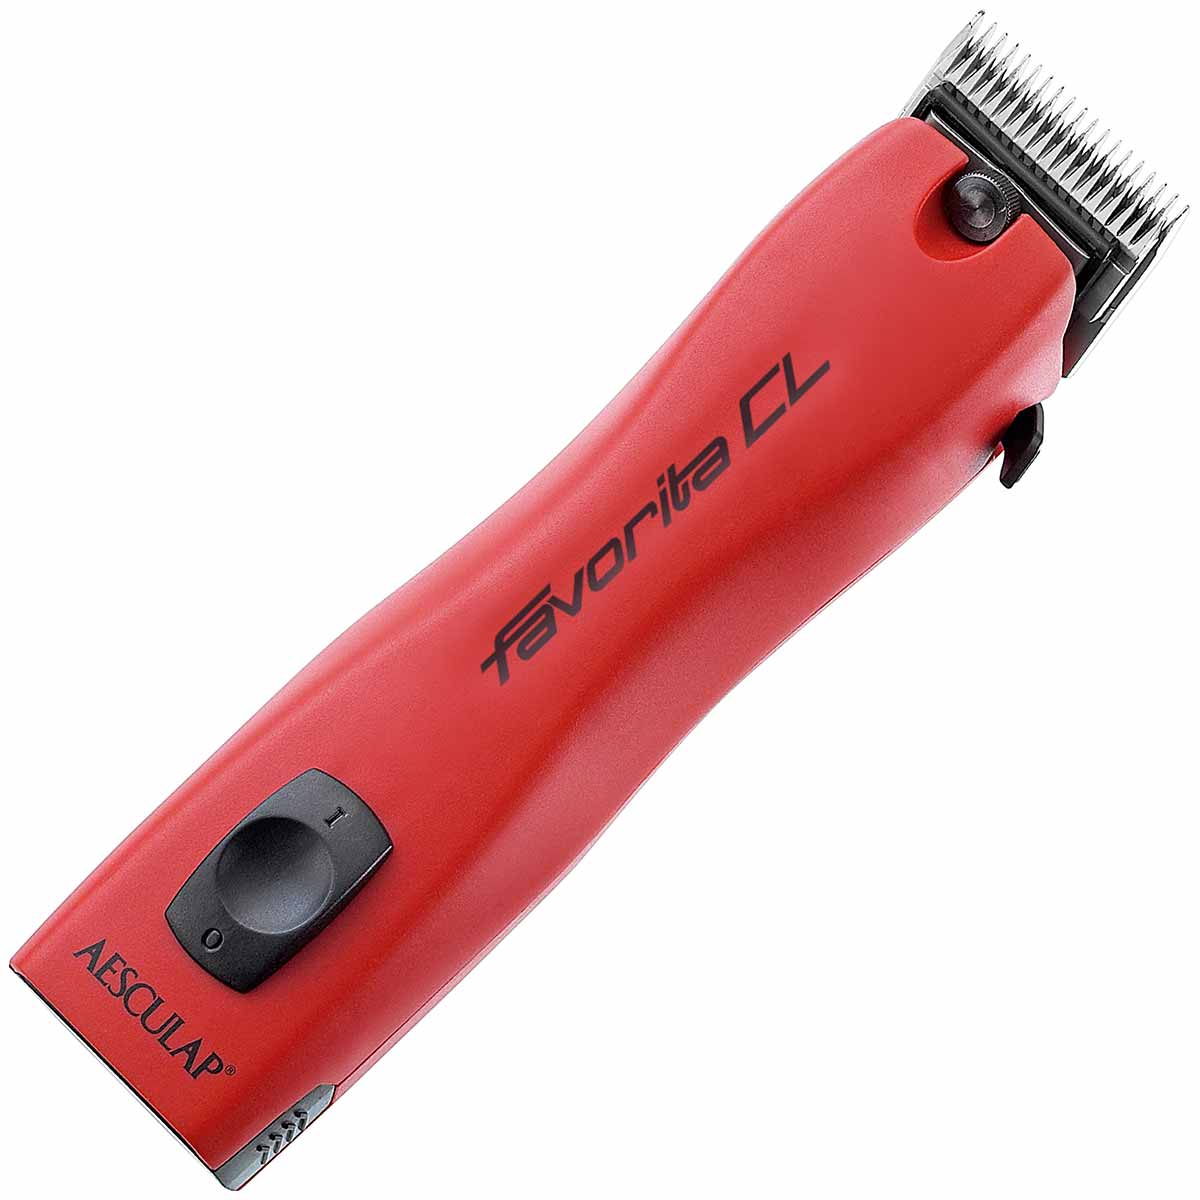 Aesculap Favorita CL Clipper 2x battery with attachment comb set